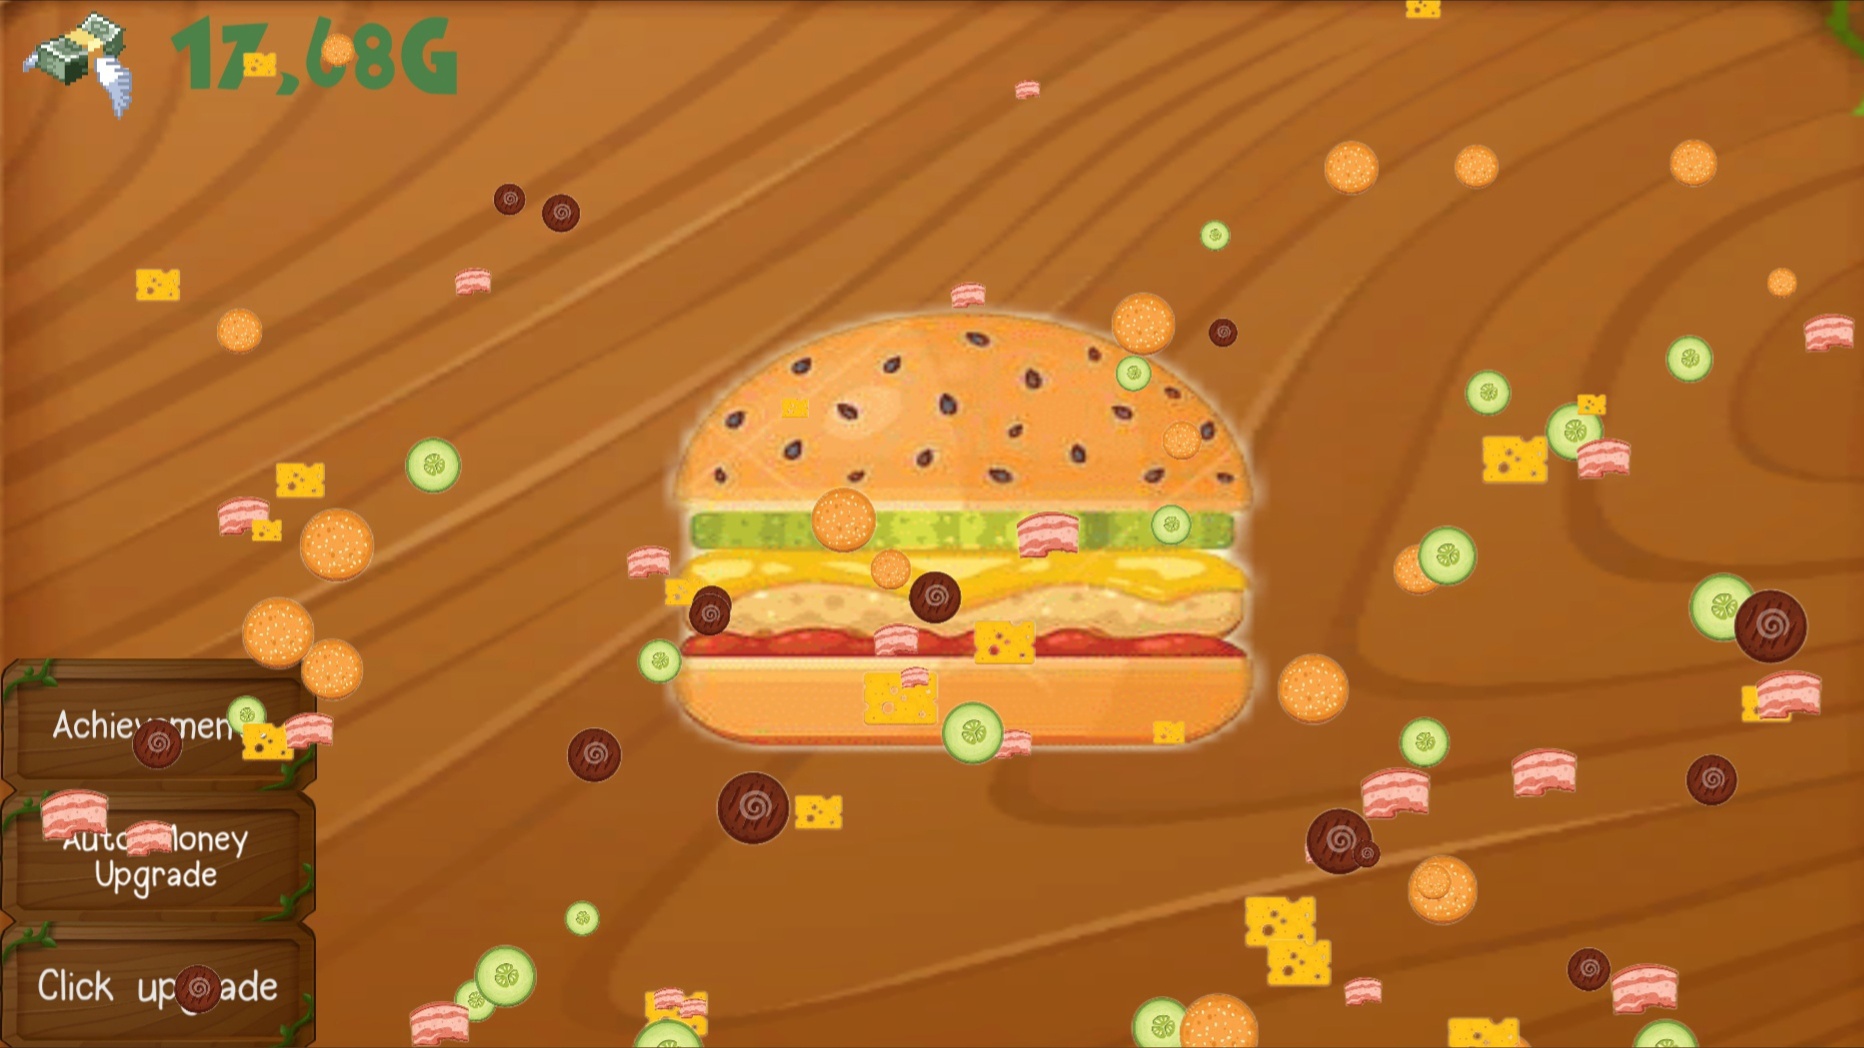 Burger Clicker  Play the Game for Free on PacoGames